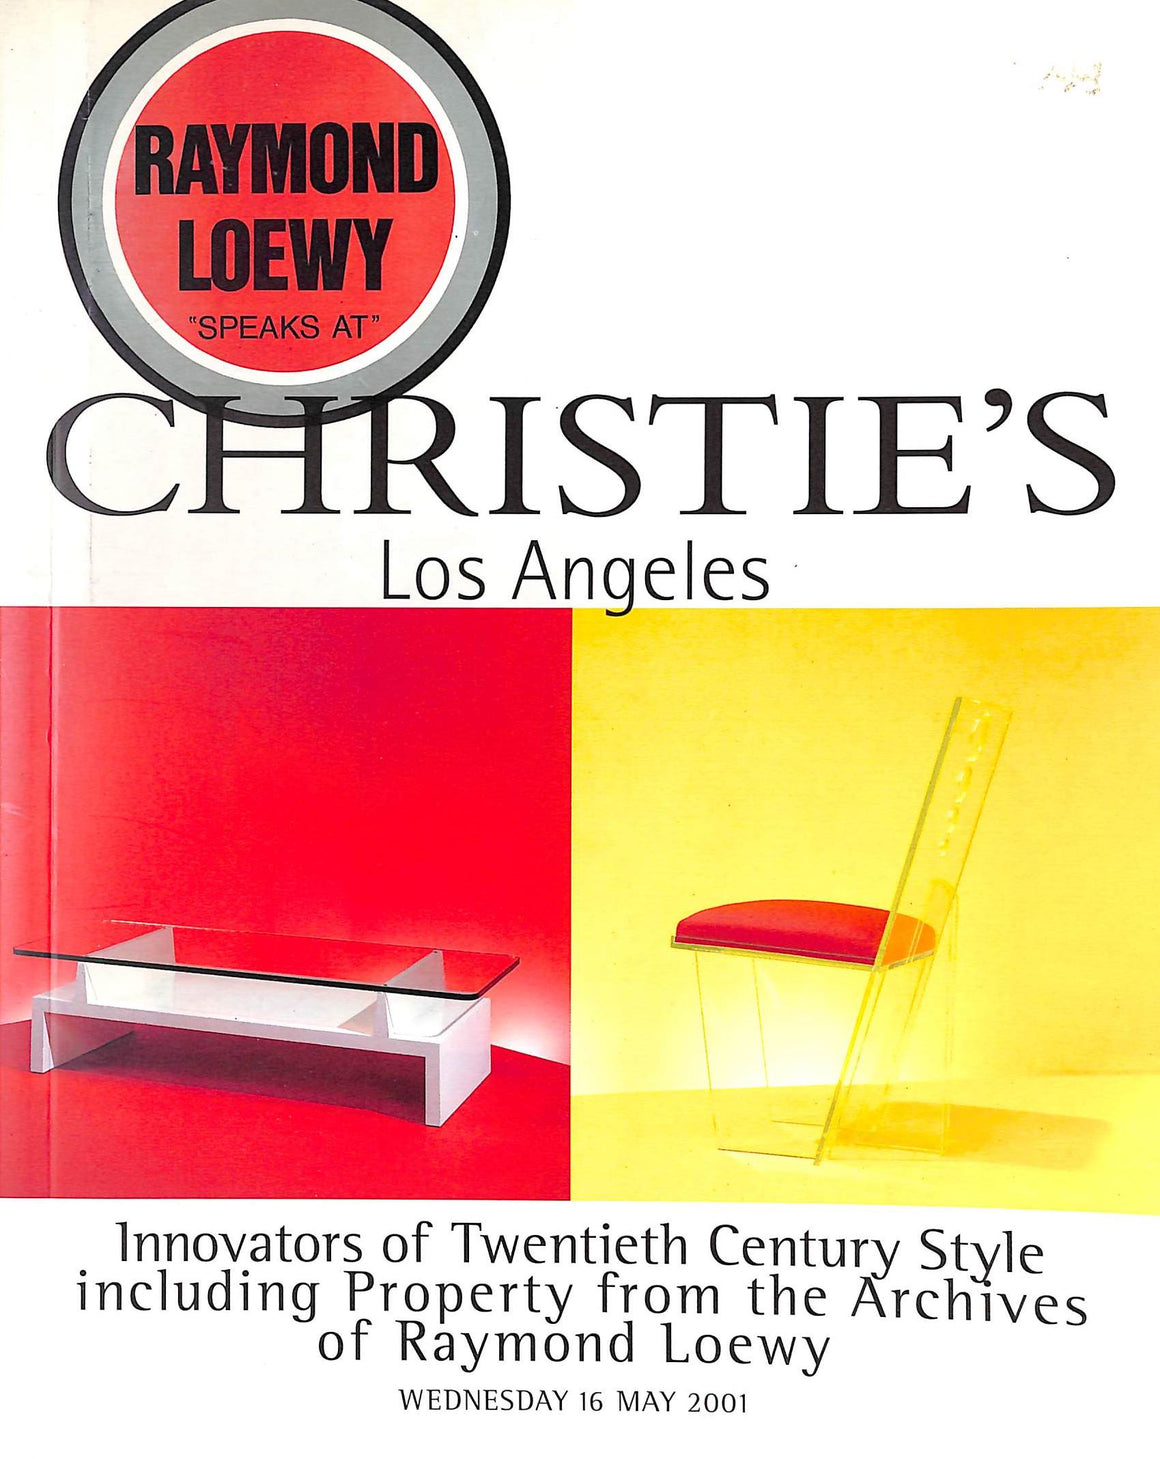 Innovators Of Twentieth Century Style Including Property From The Archives Of Raymond Loewy - 16 May 2001